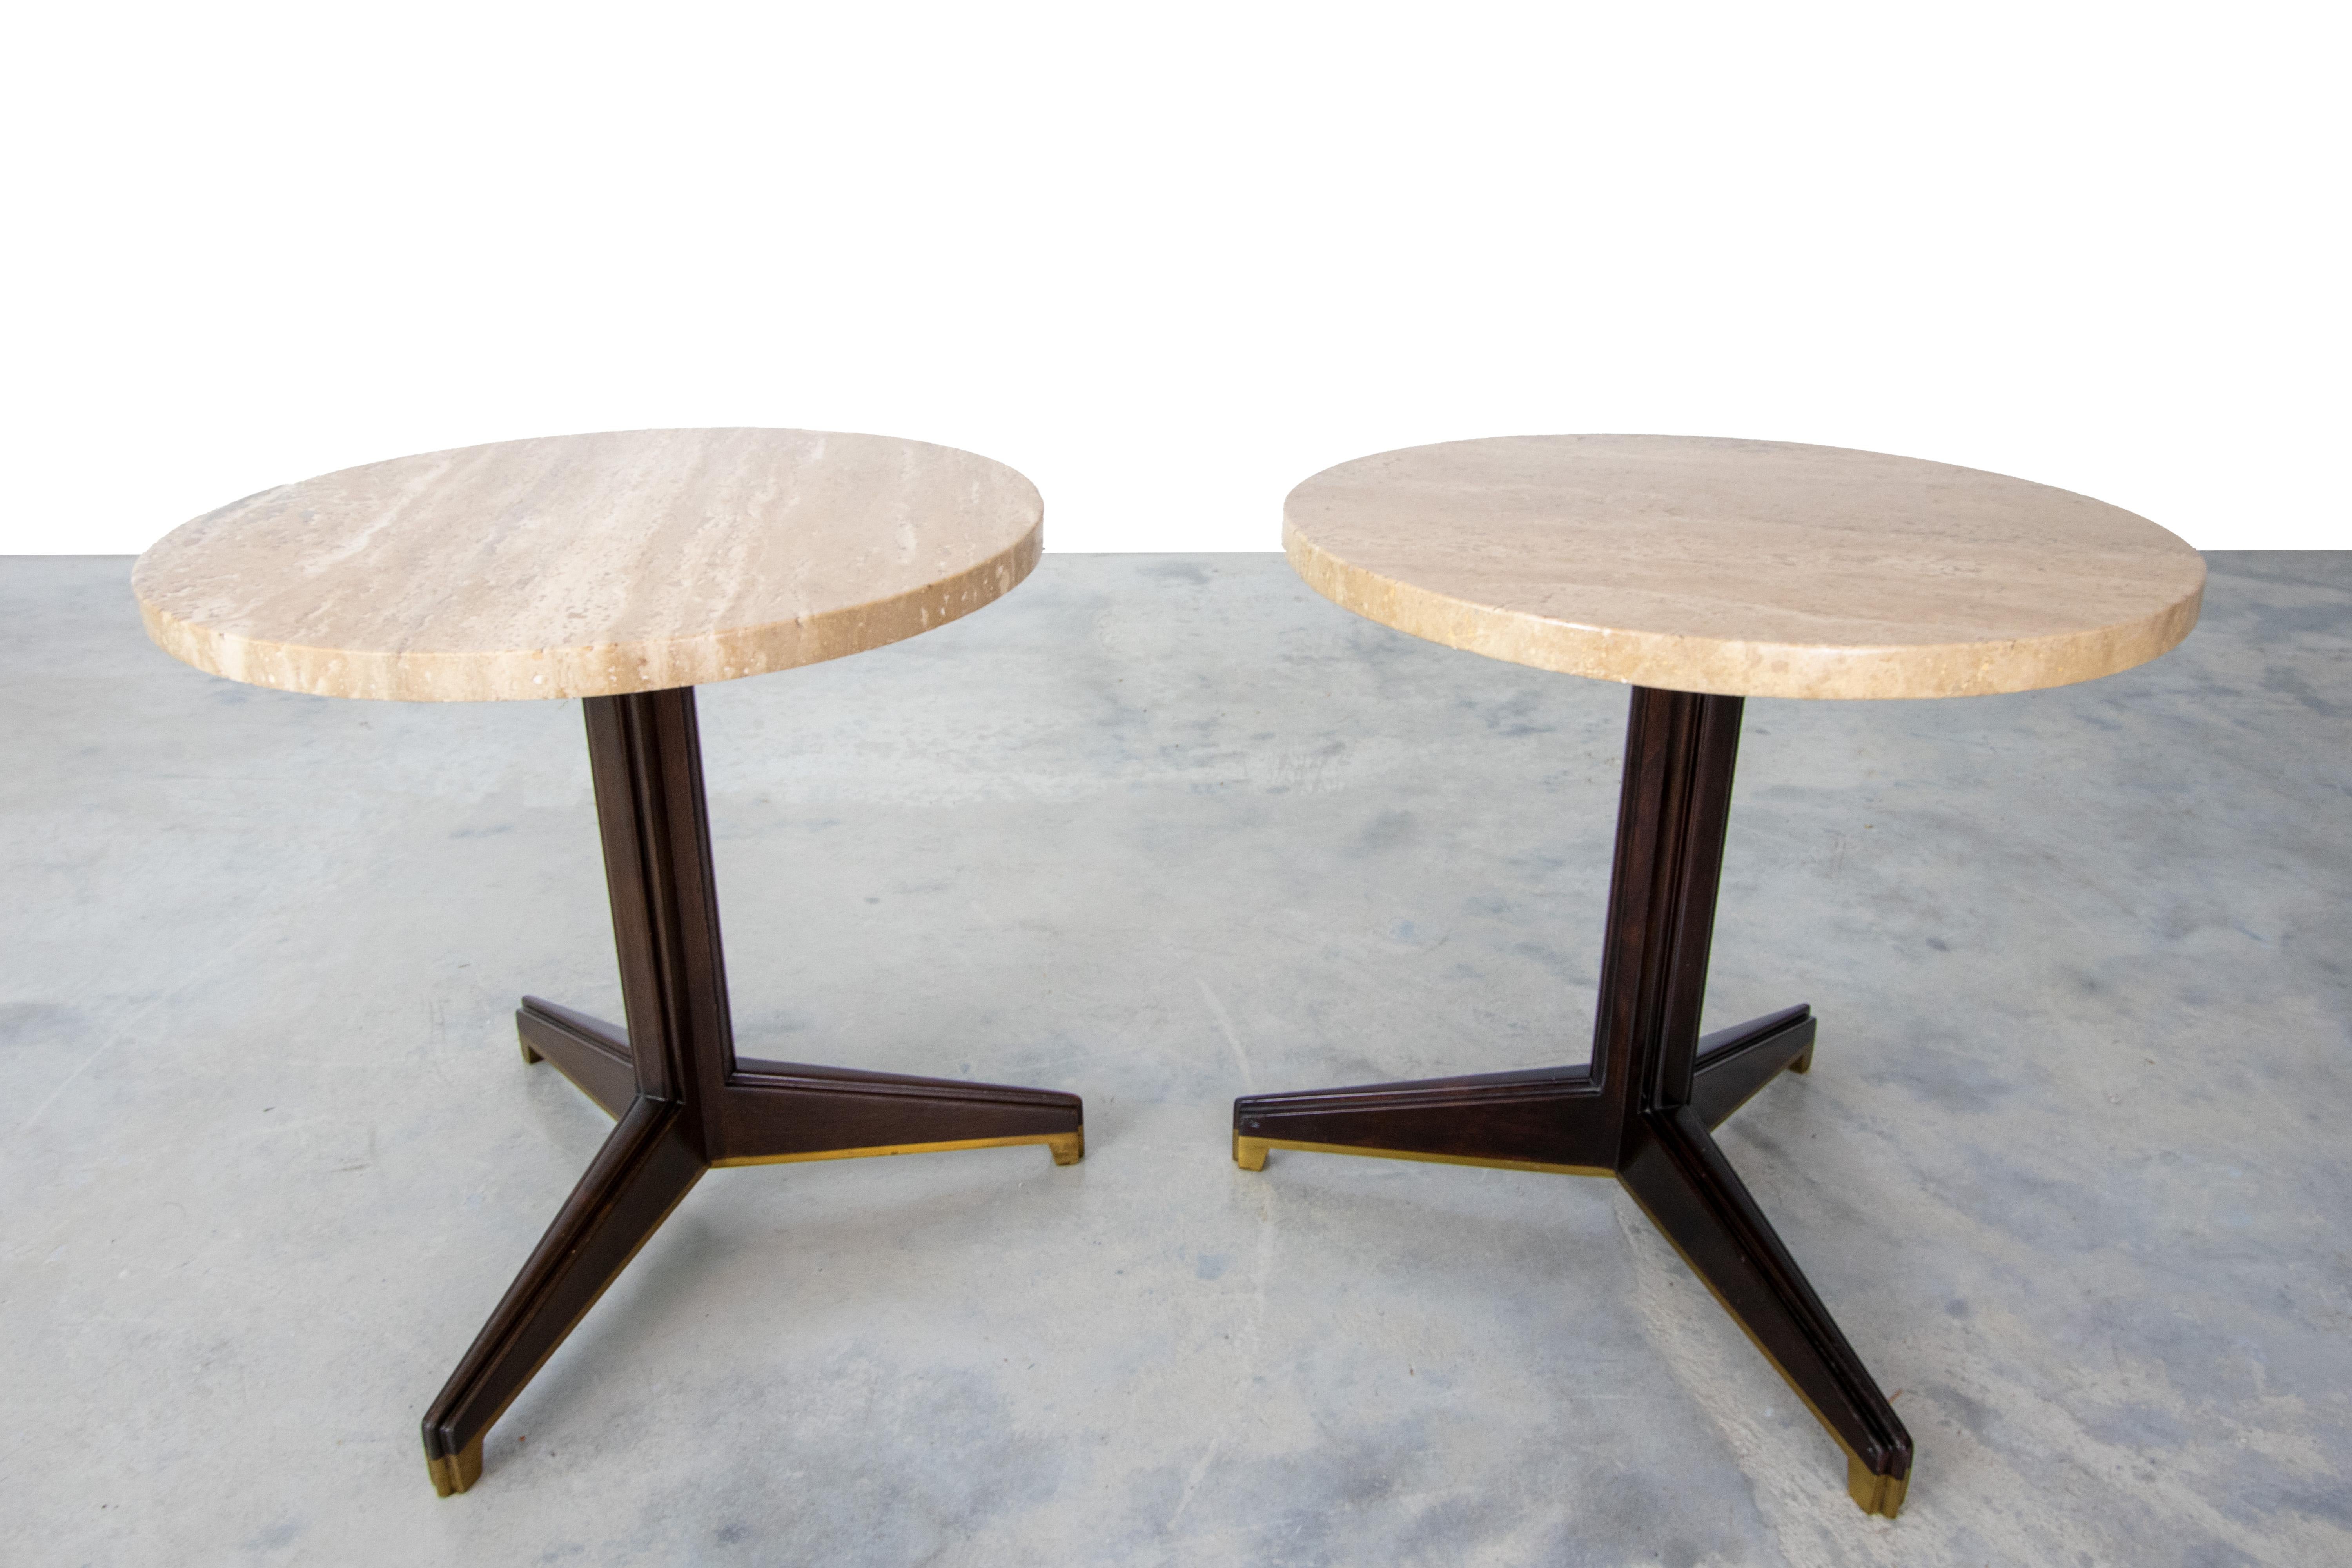 Pair of Edward Wormley for Dunbar travertine and brass pedestal side tables  For Sale 4